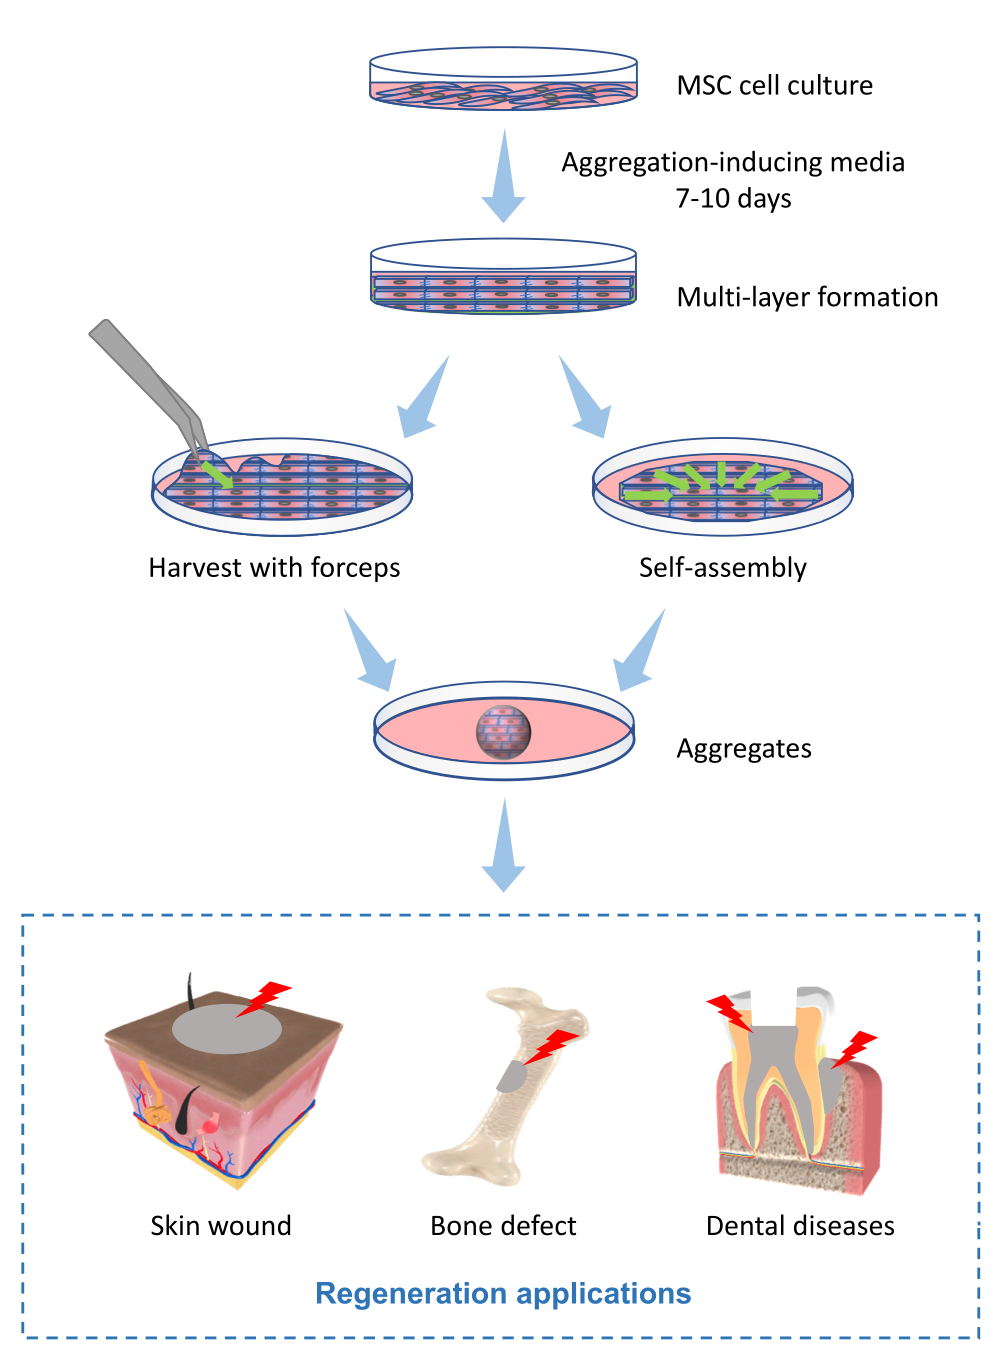 Mesenchymal condensation in tooth development and regeneration: a